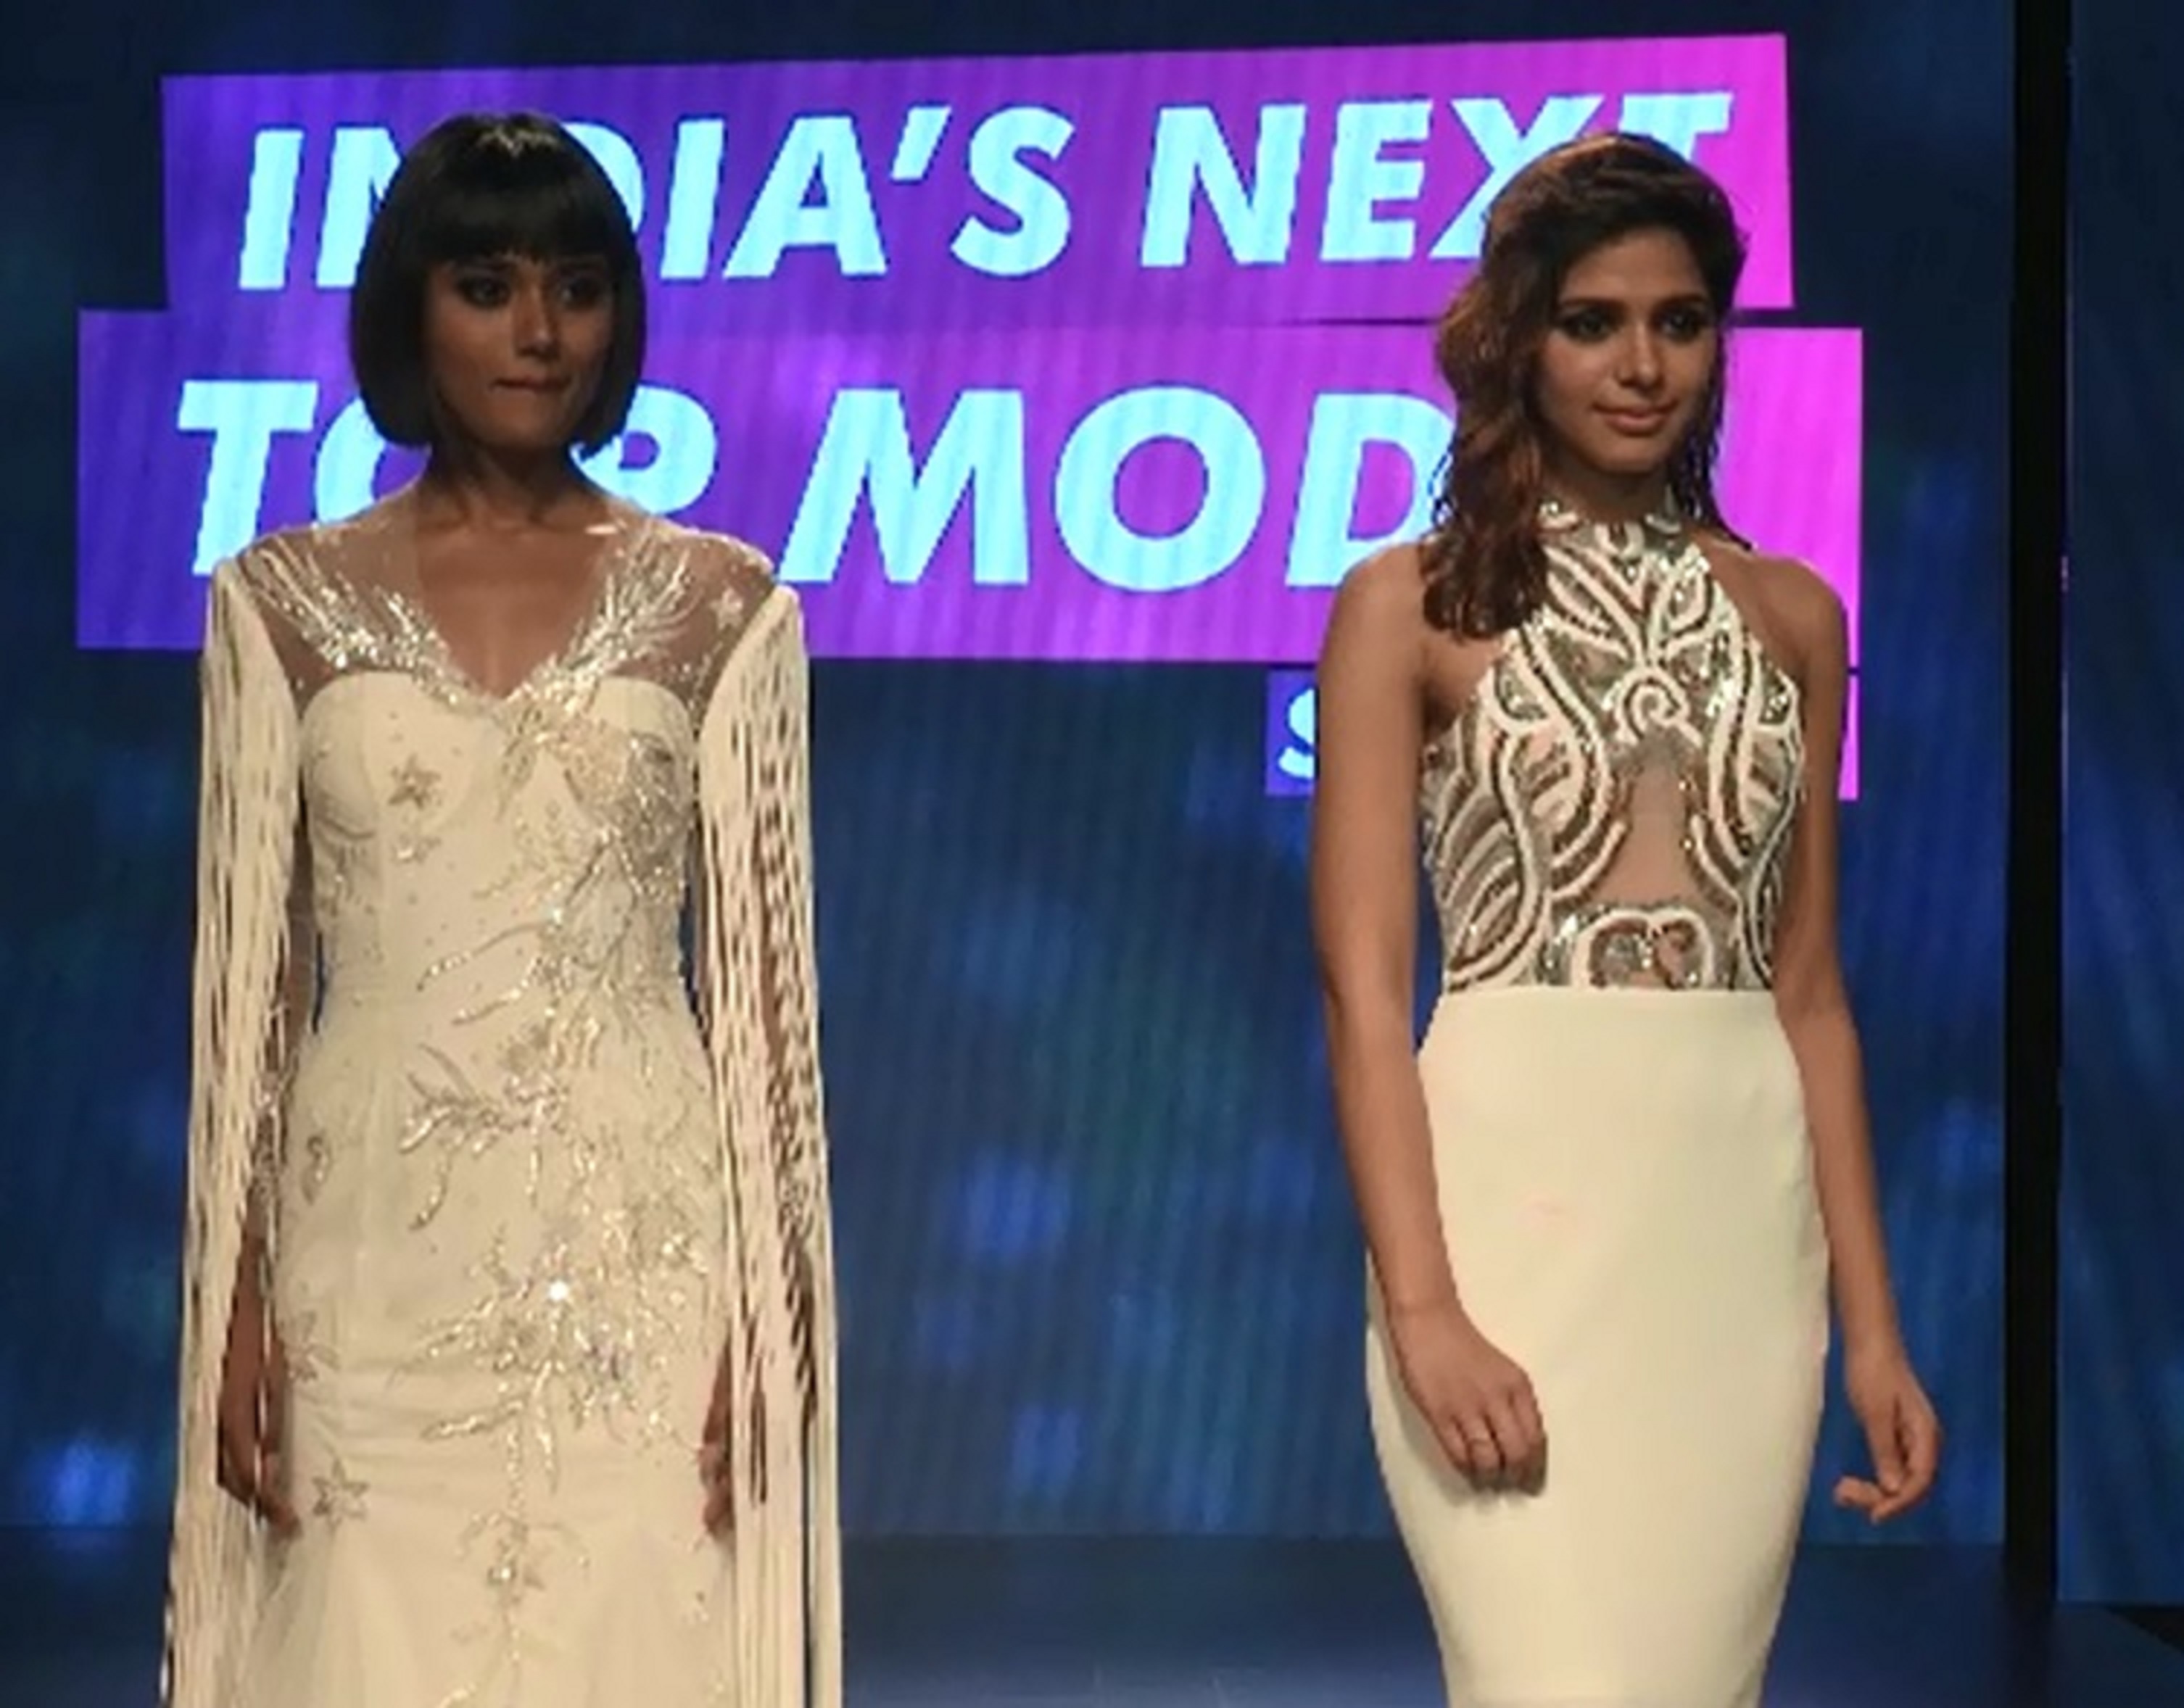 Pranati wins India's Next Top Model 2 while Jantee seconds her